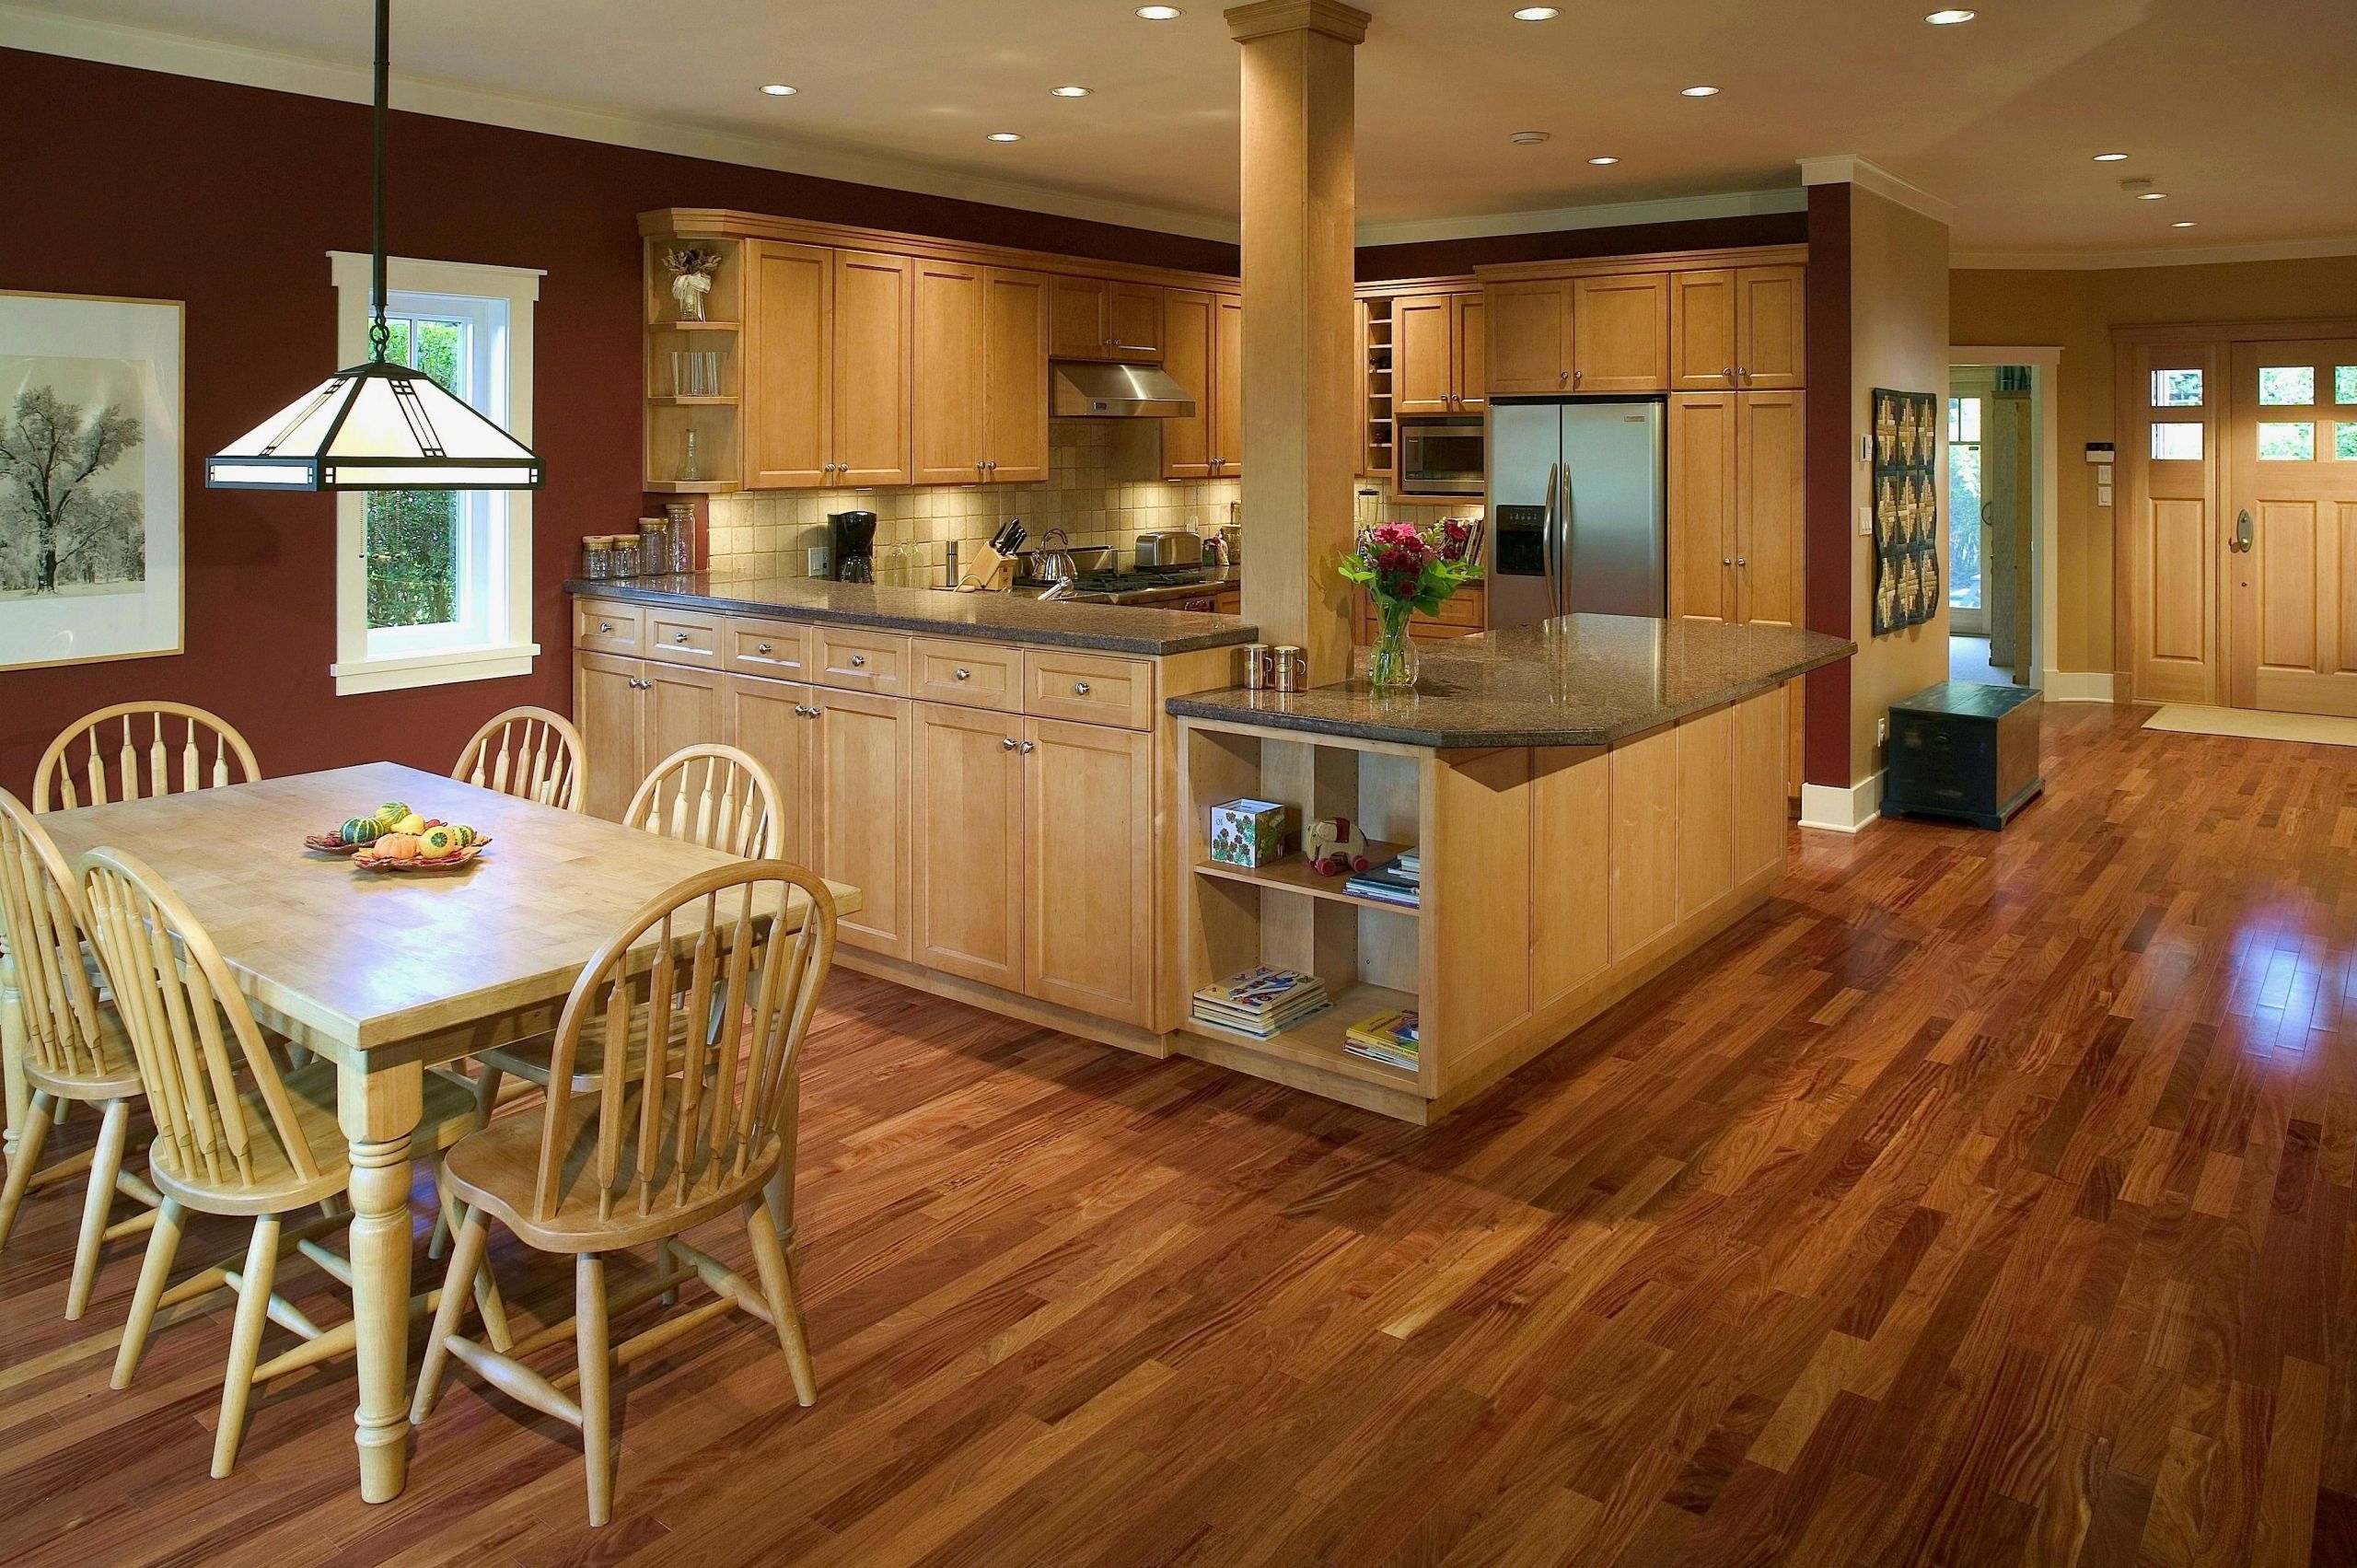 Cost Of Small Kitchen Remodel
 to check out more about Remodeling Kitchen Ideas